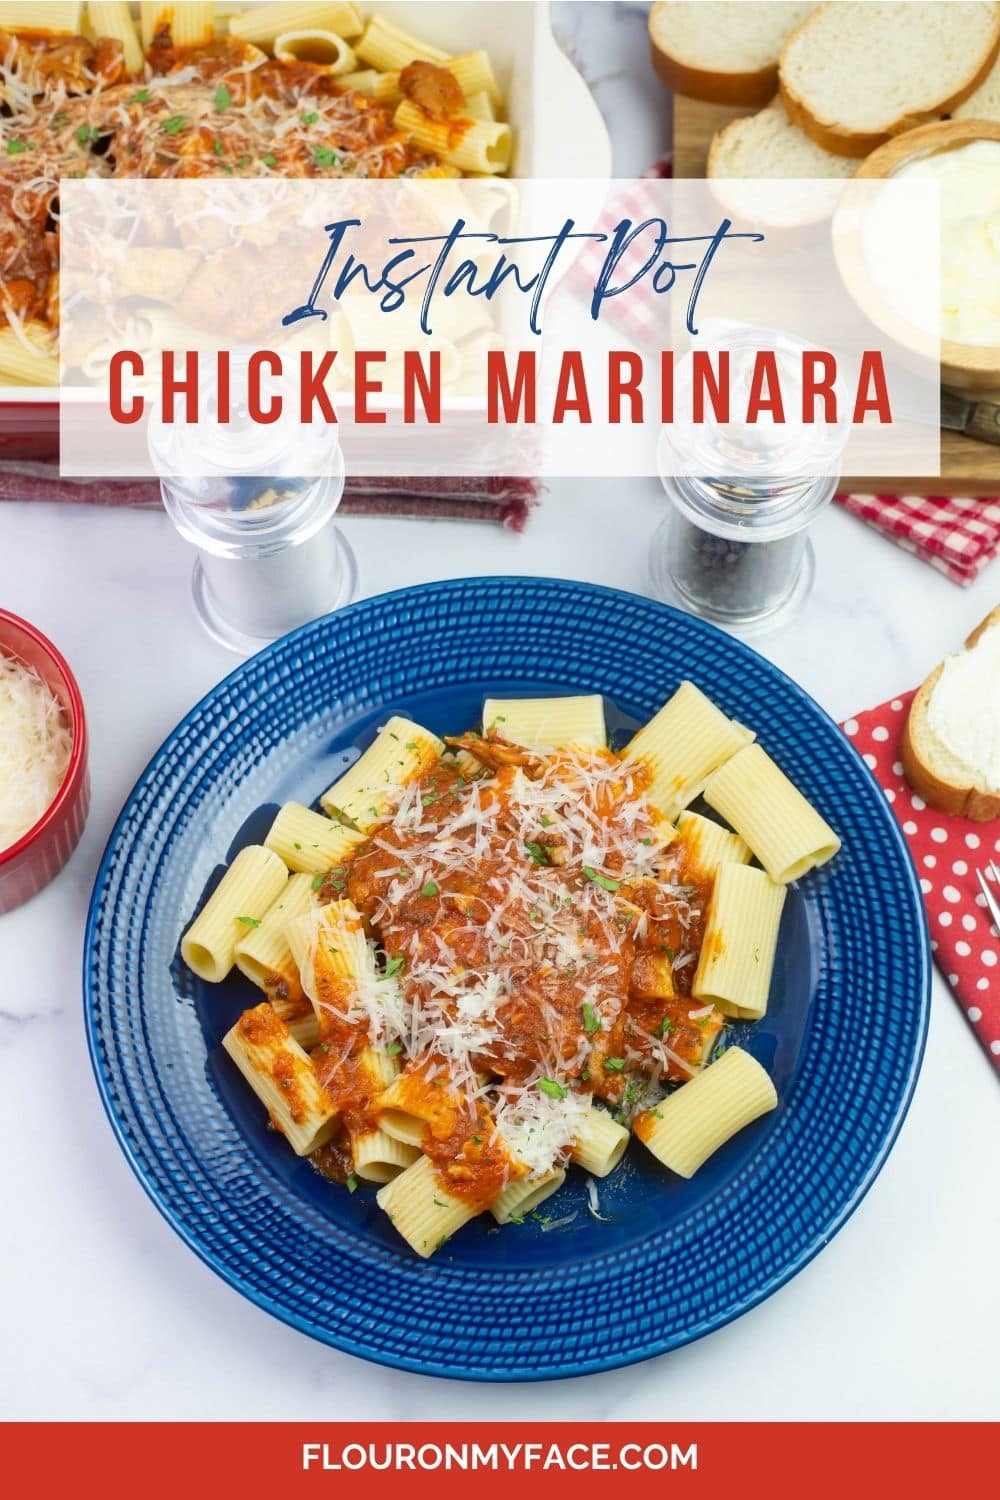 Vertical image of Chicken Marinara served on a plate with sliced bread.